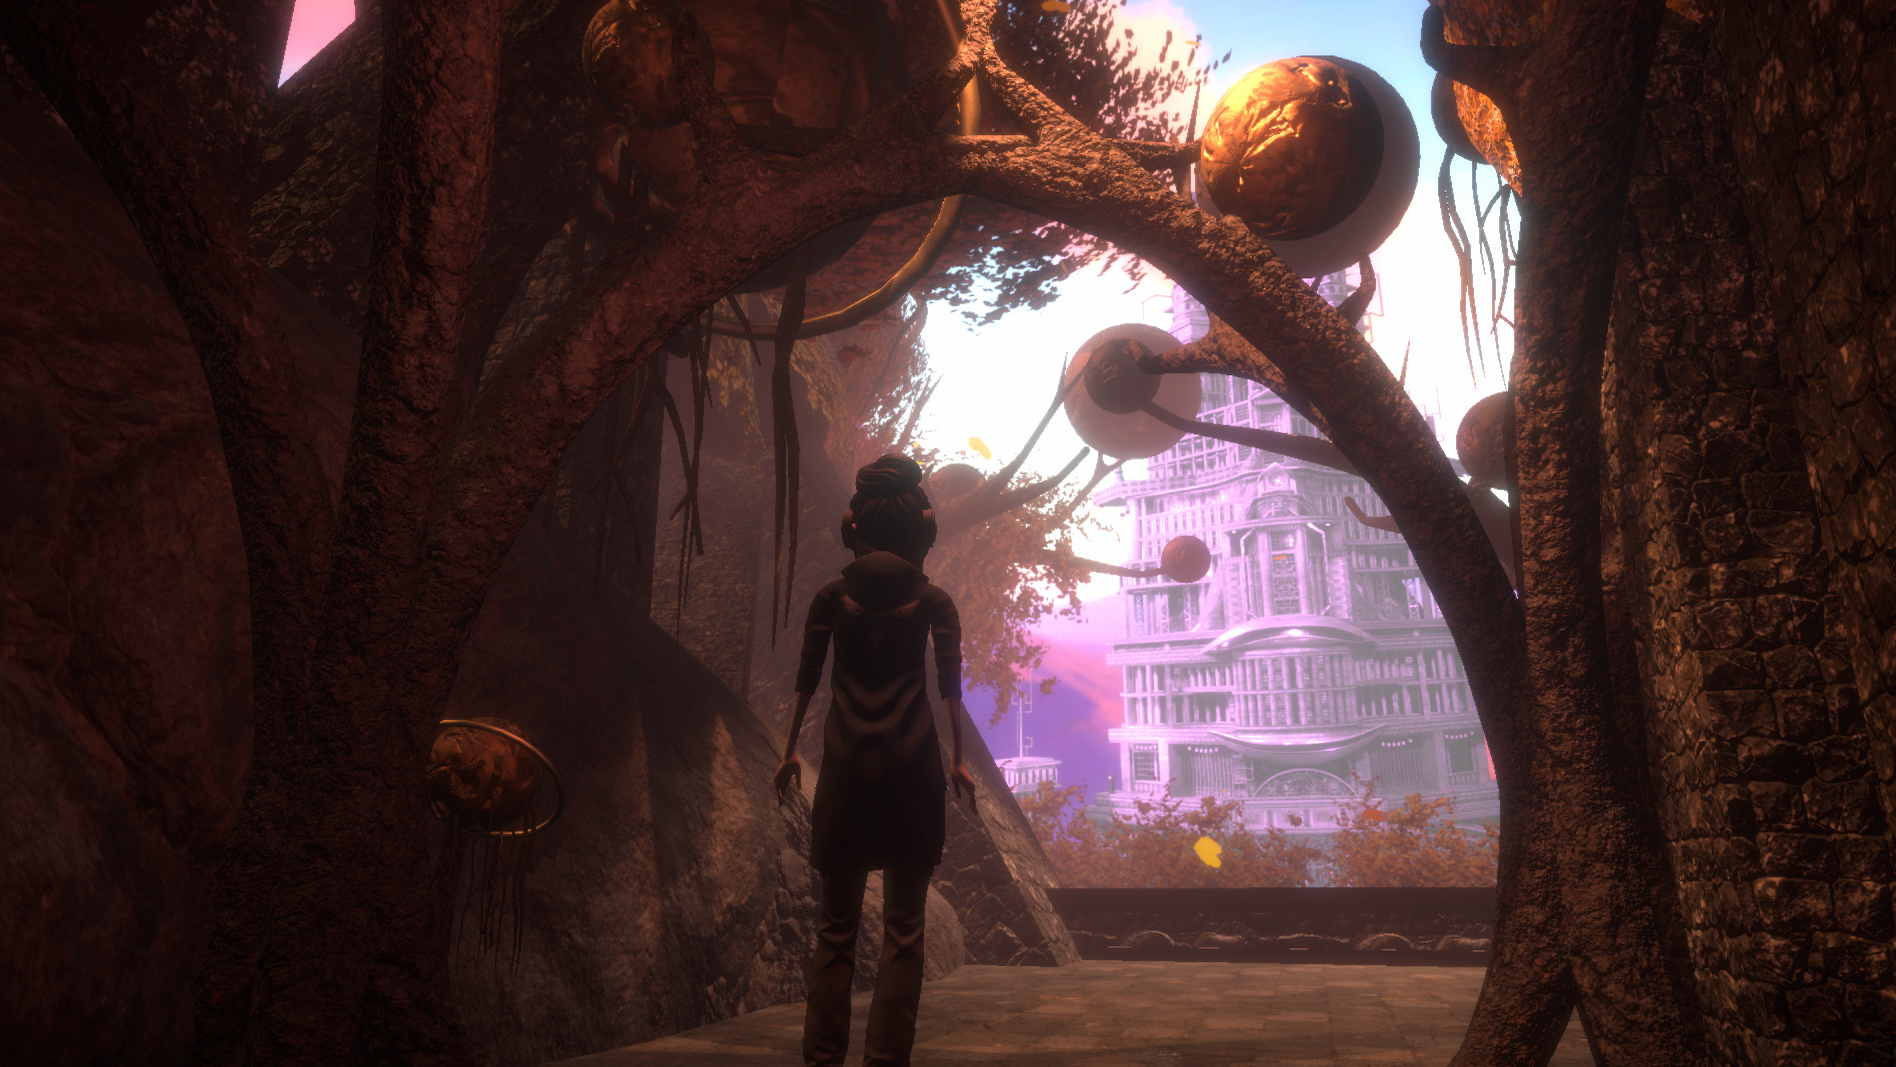 A screenshot from EXIT VEIL featuring the main character, Tori, in front of an autumnal scene with a large white tower in the background.